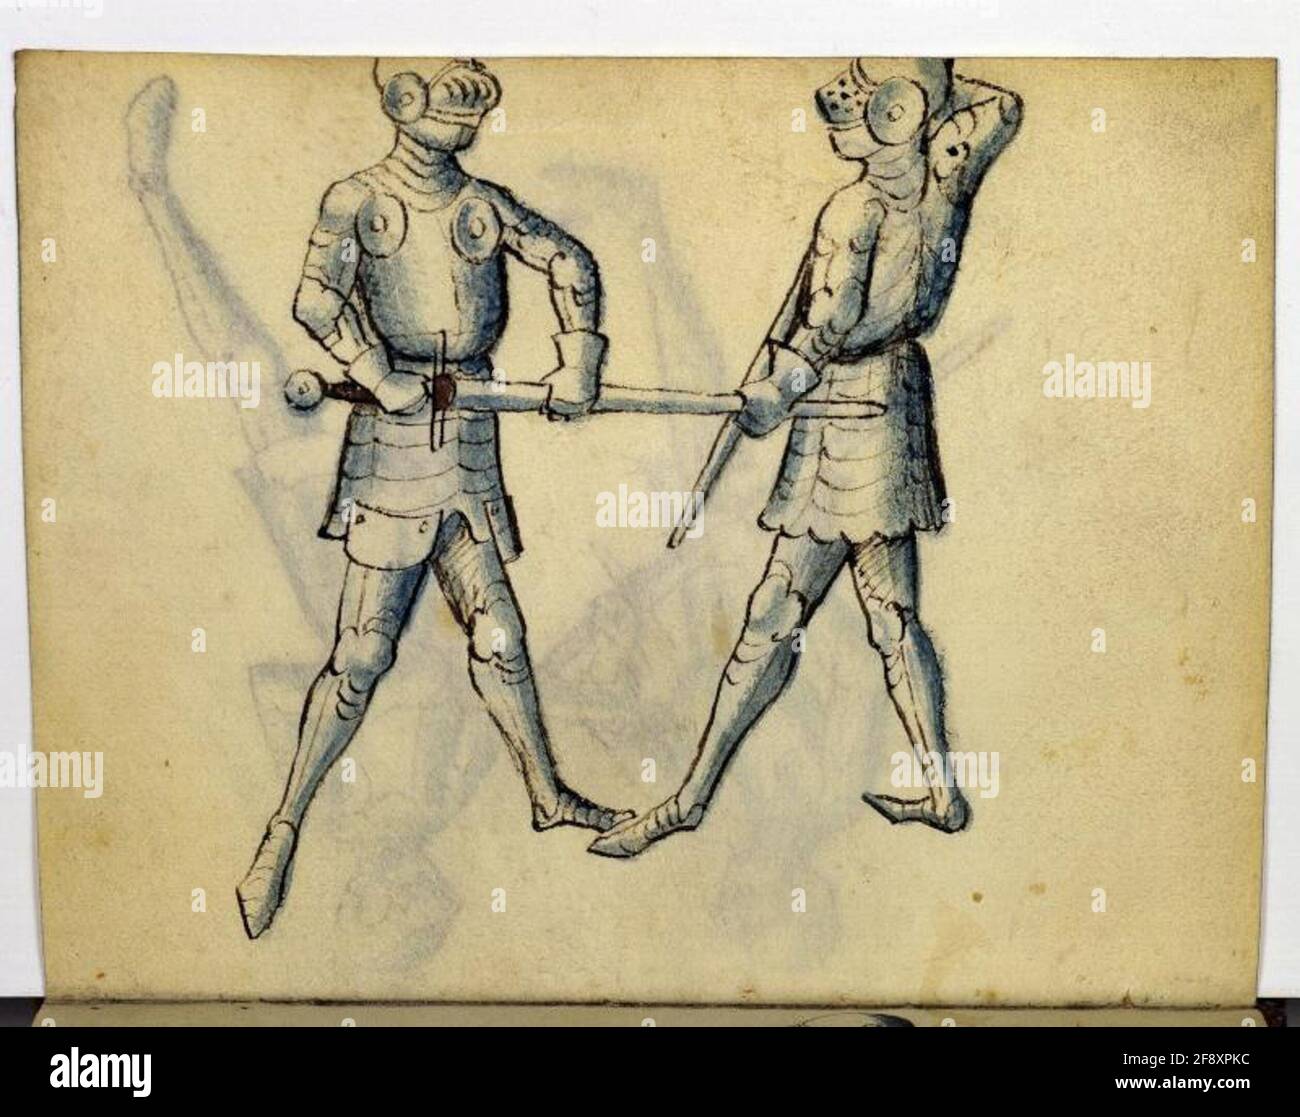 Cod. 11093, fol. 9v: Book on Swordsmanship and Wrestling Full page: fencing scene; pen and brush drawing, Southwestern Germany, mid-15th c. Stock Photo